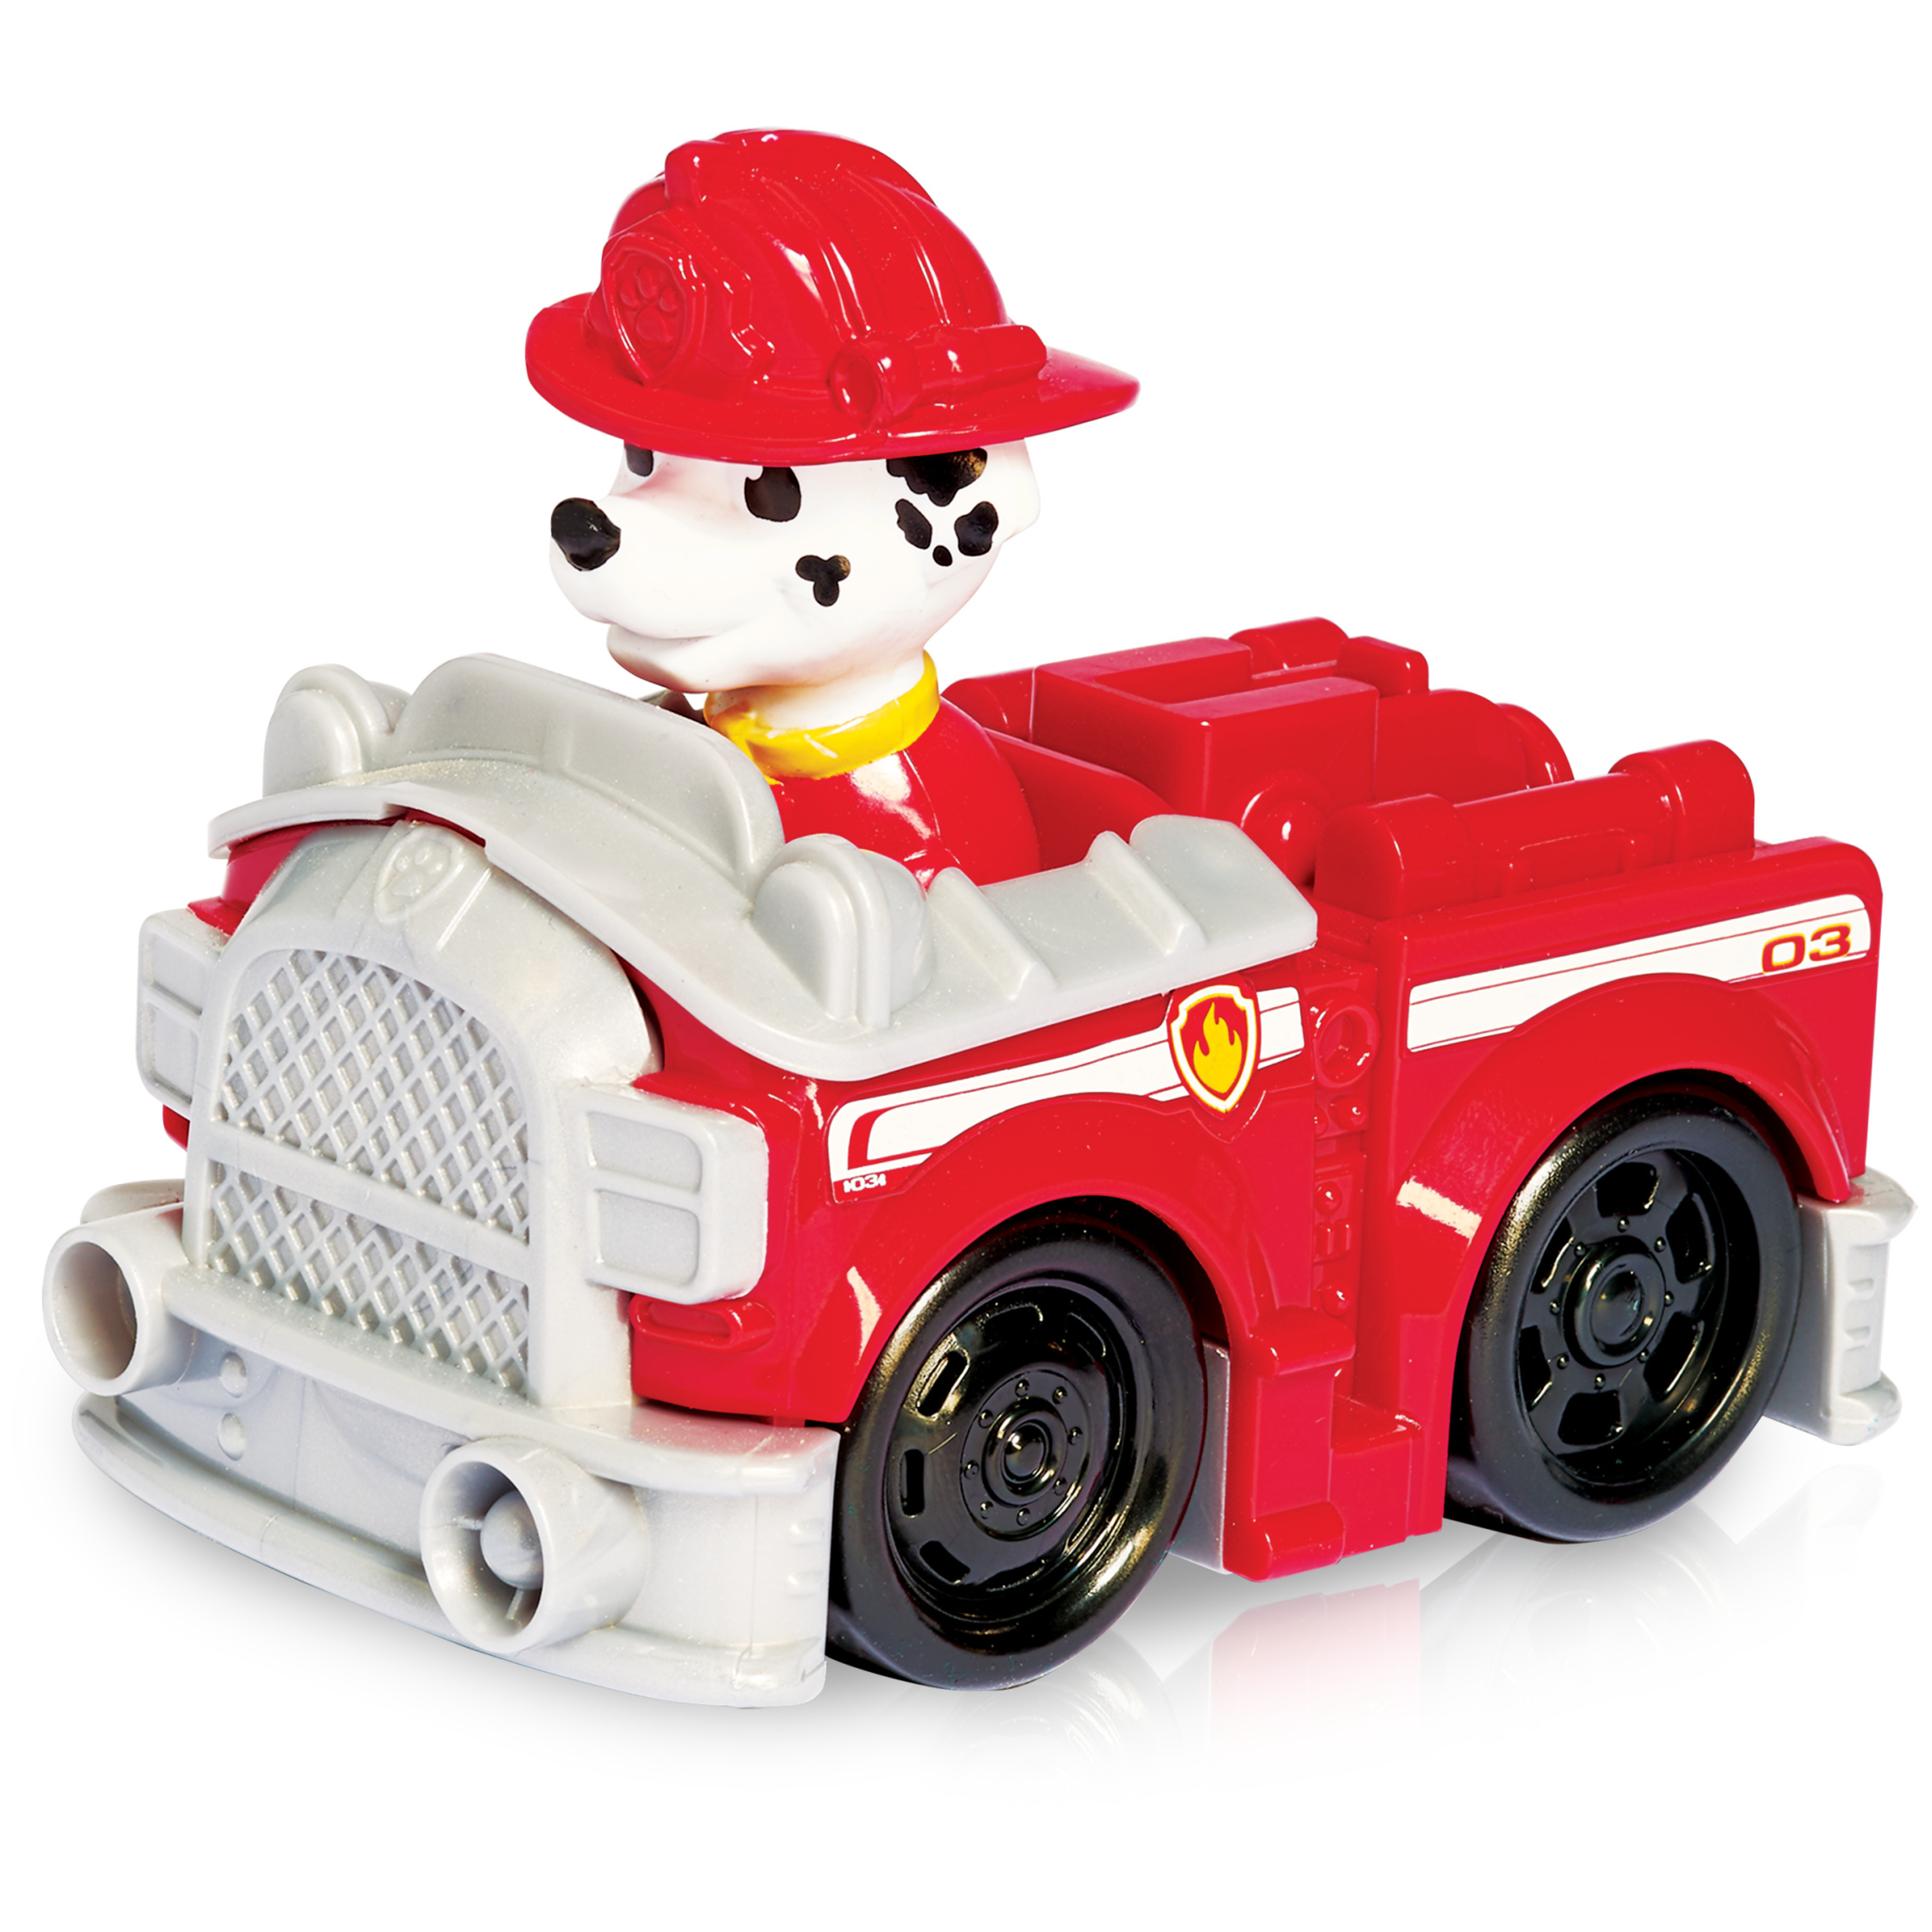 PAW Patrol Rescue Racers 3-Pack Vehicle with Figure Set - image 3 of 6